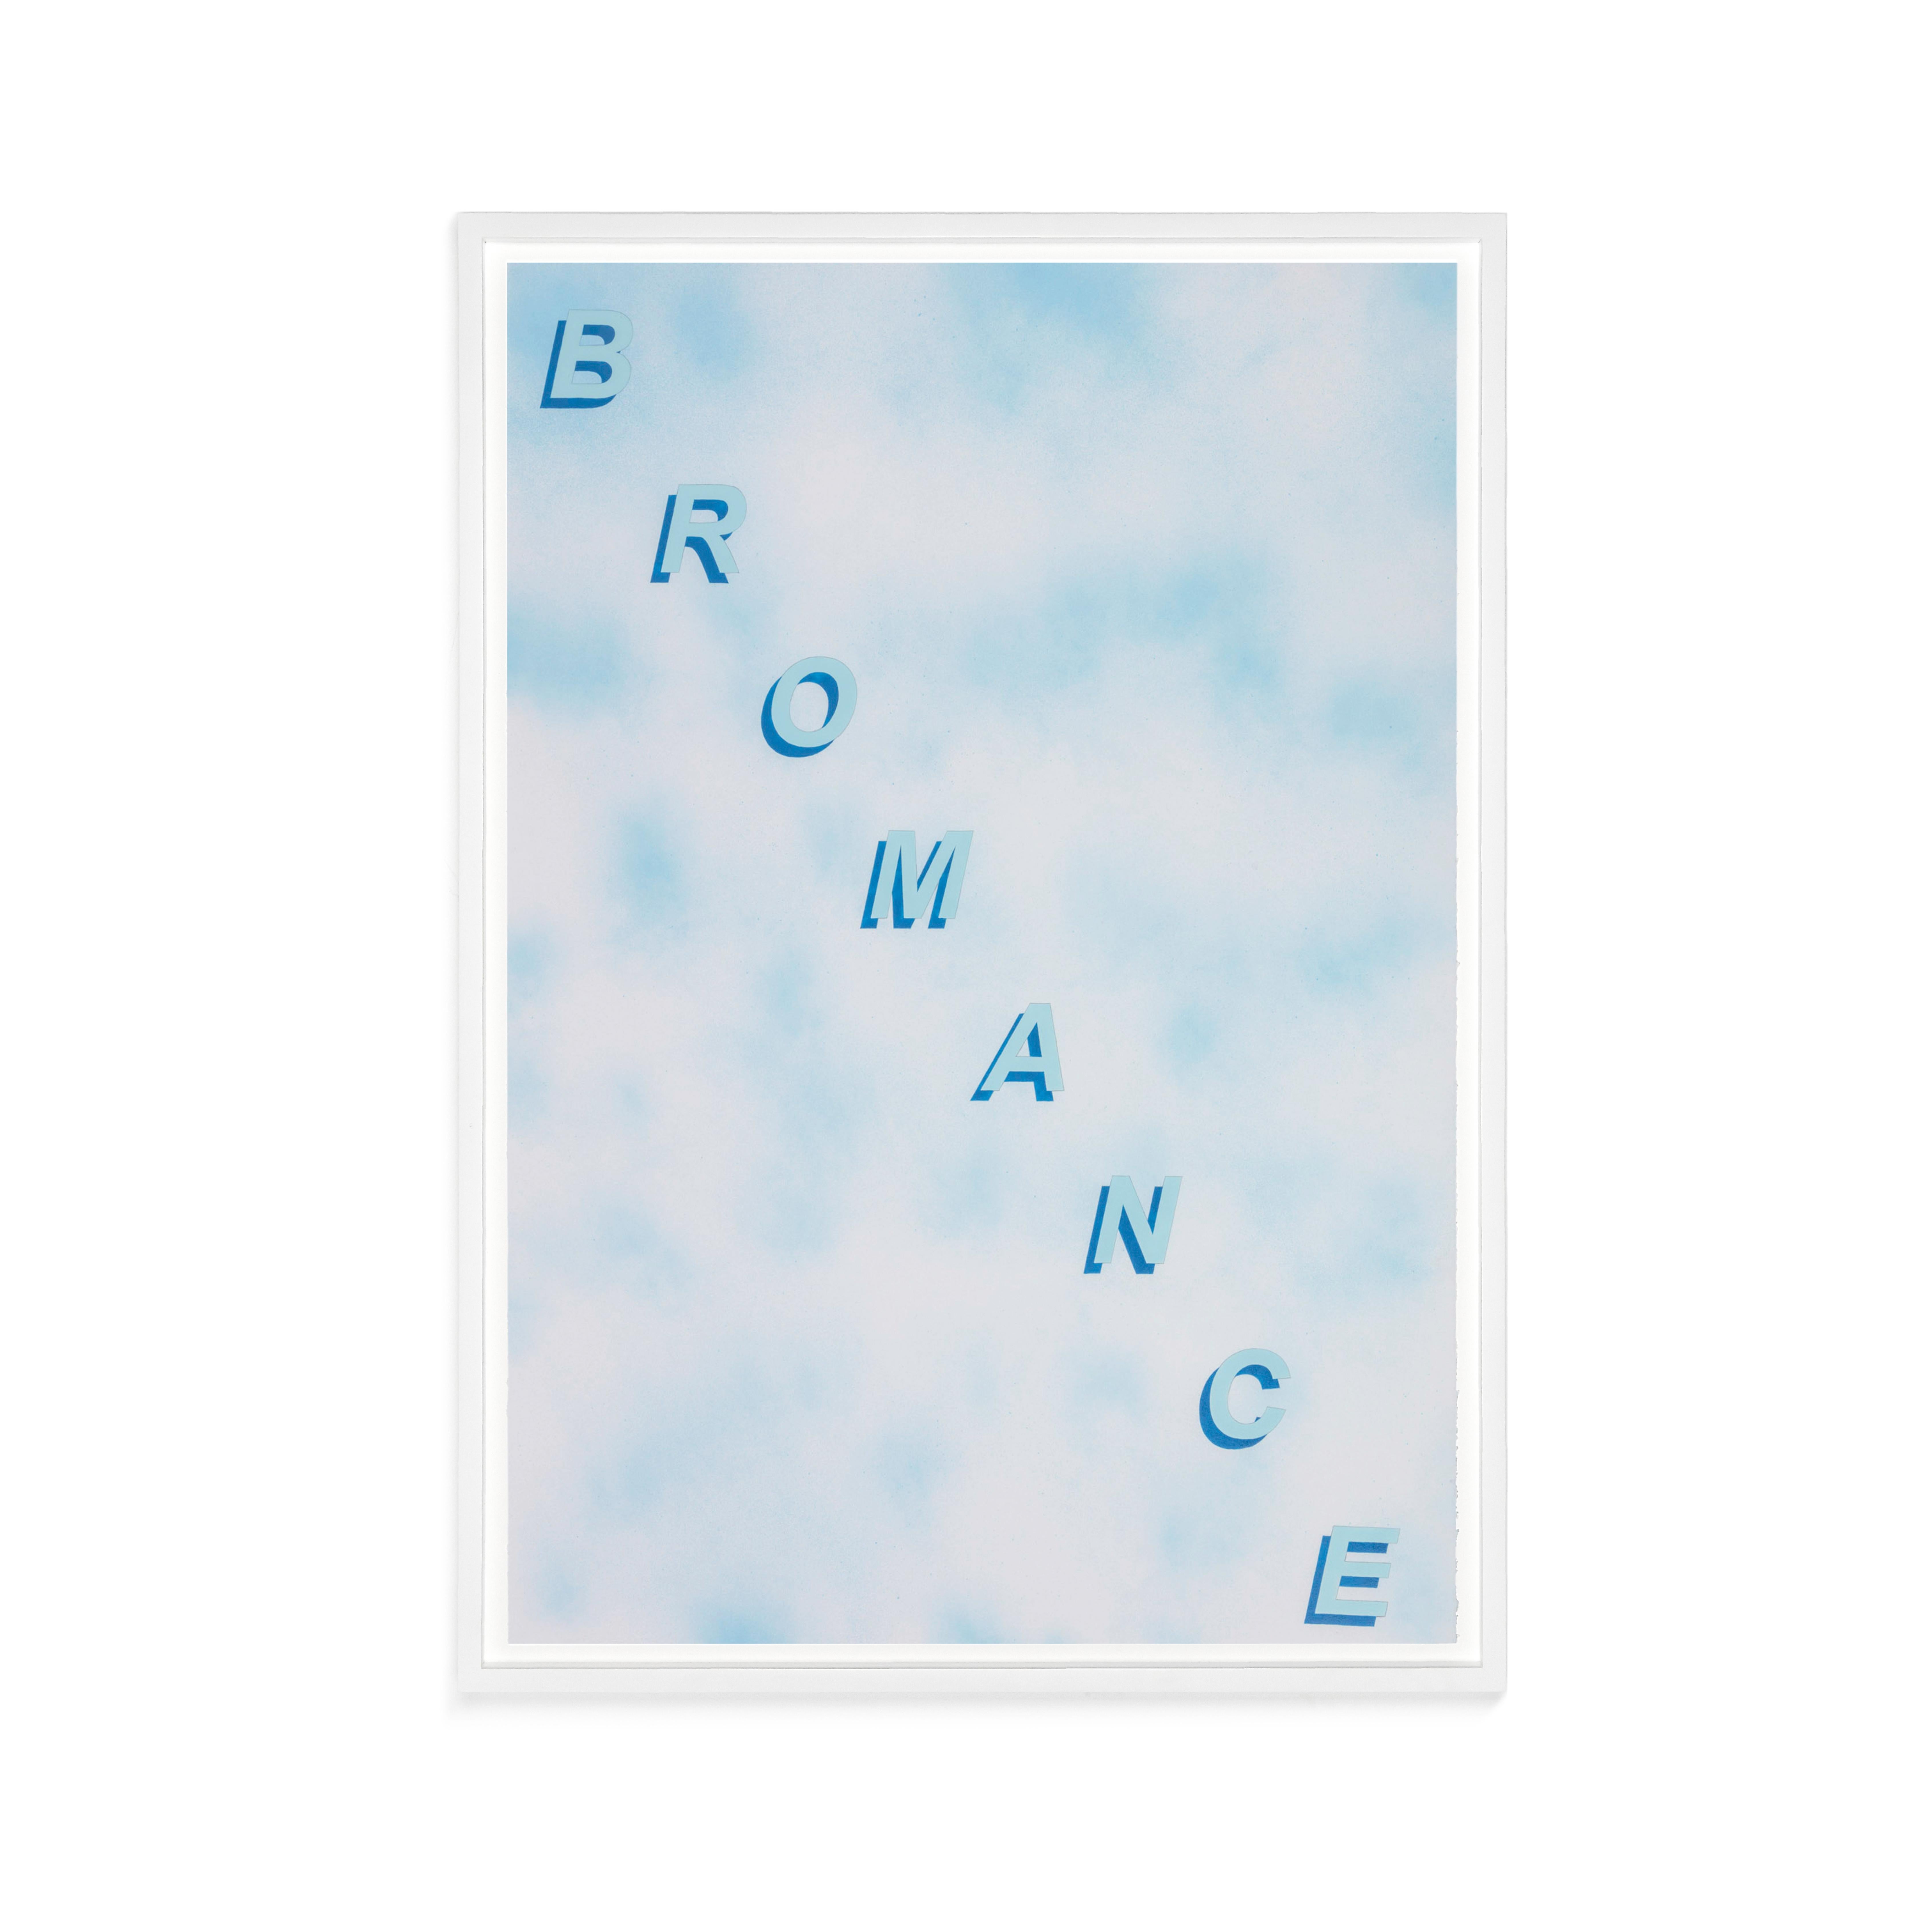 Untitled (Bromance), 2017 is a unique contemporary textual painting on paper. The artist first creates a unique background atmosphere with matte spray paint and then meticulously hand-paints text in his material of choice, nail enamel.

Artwork is